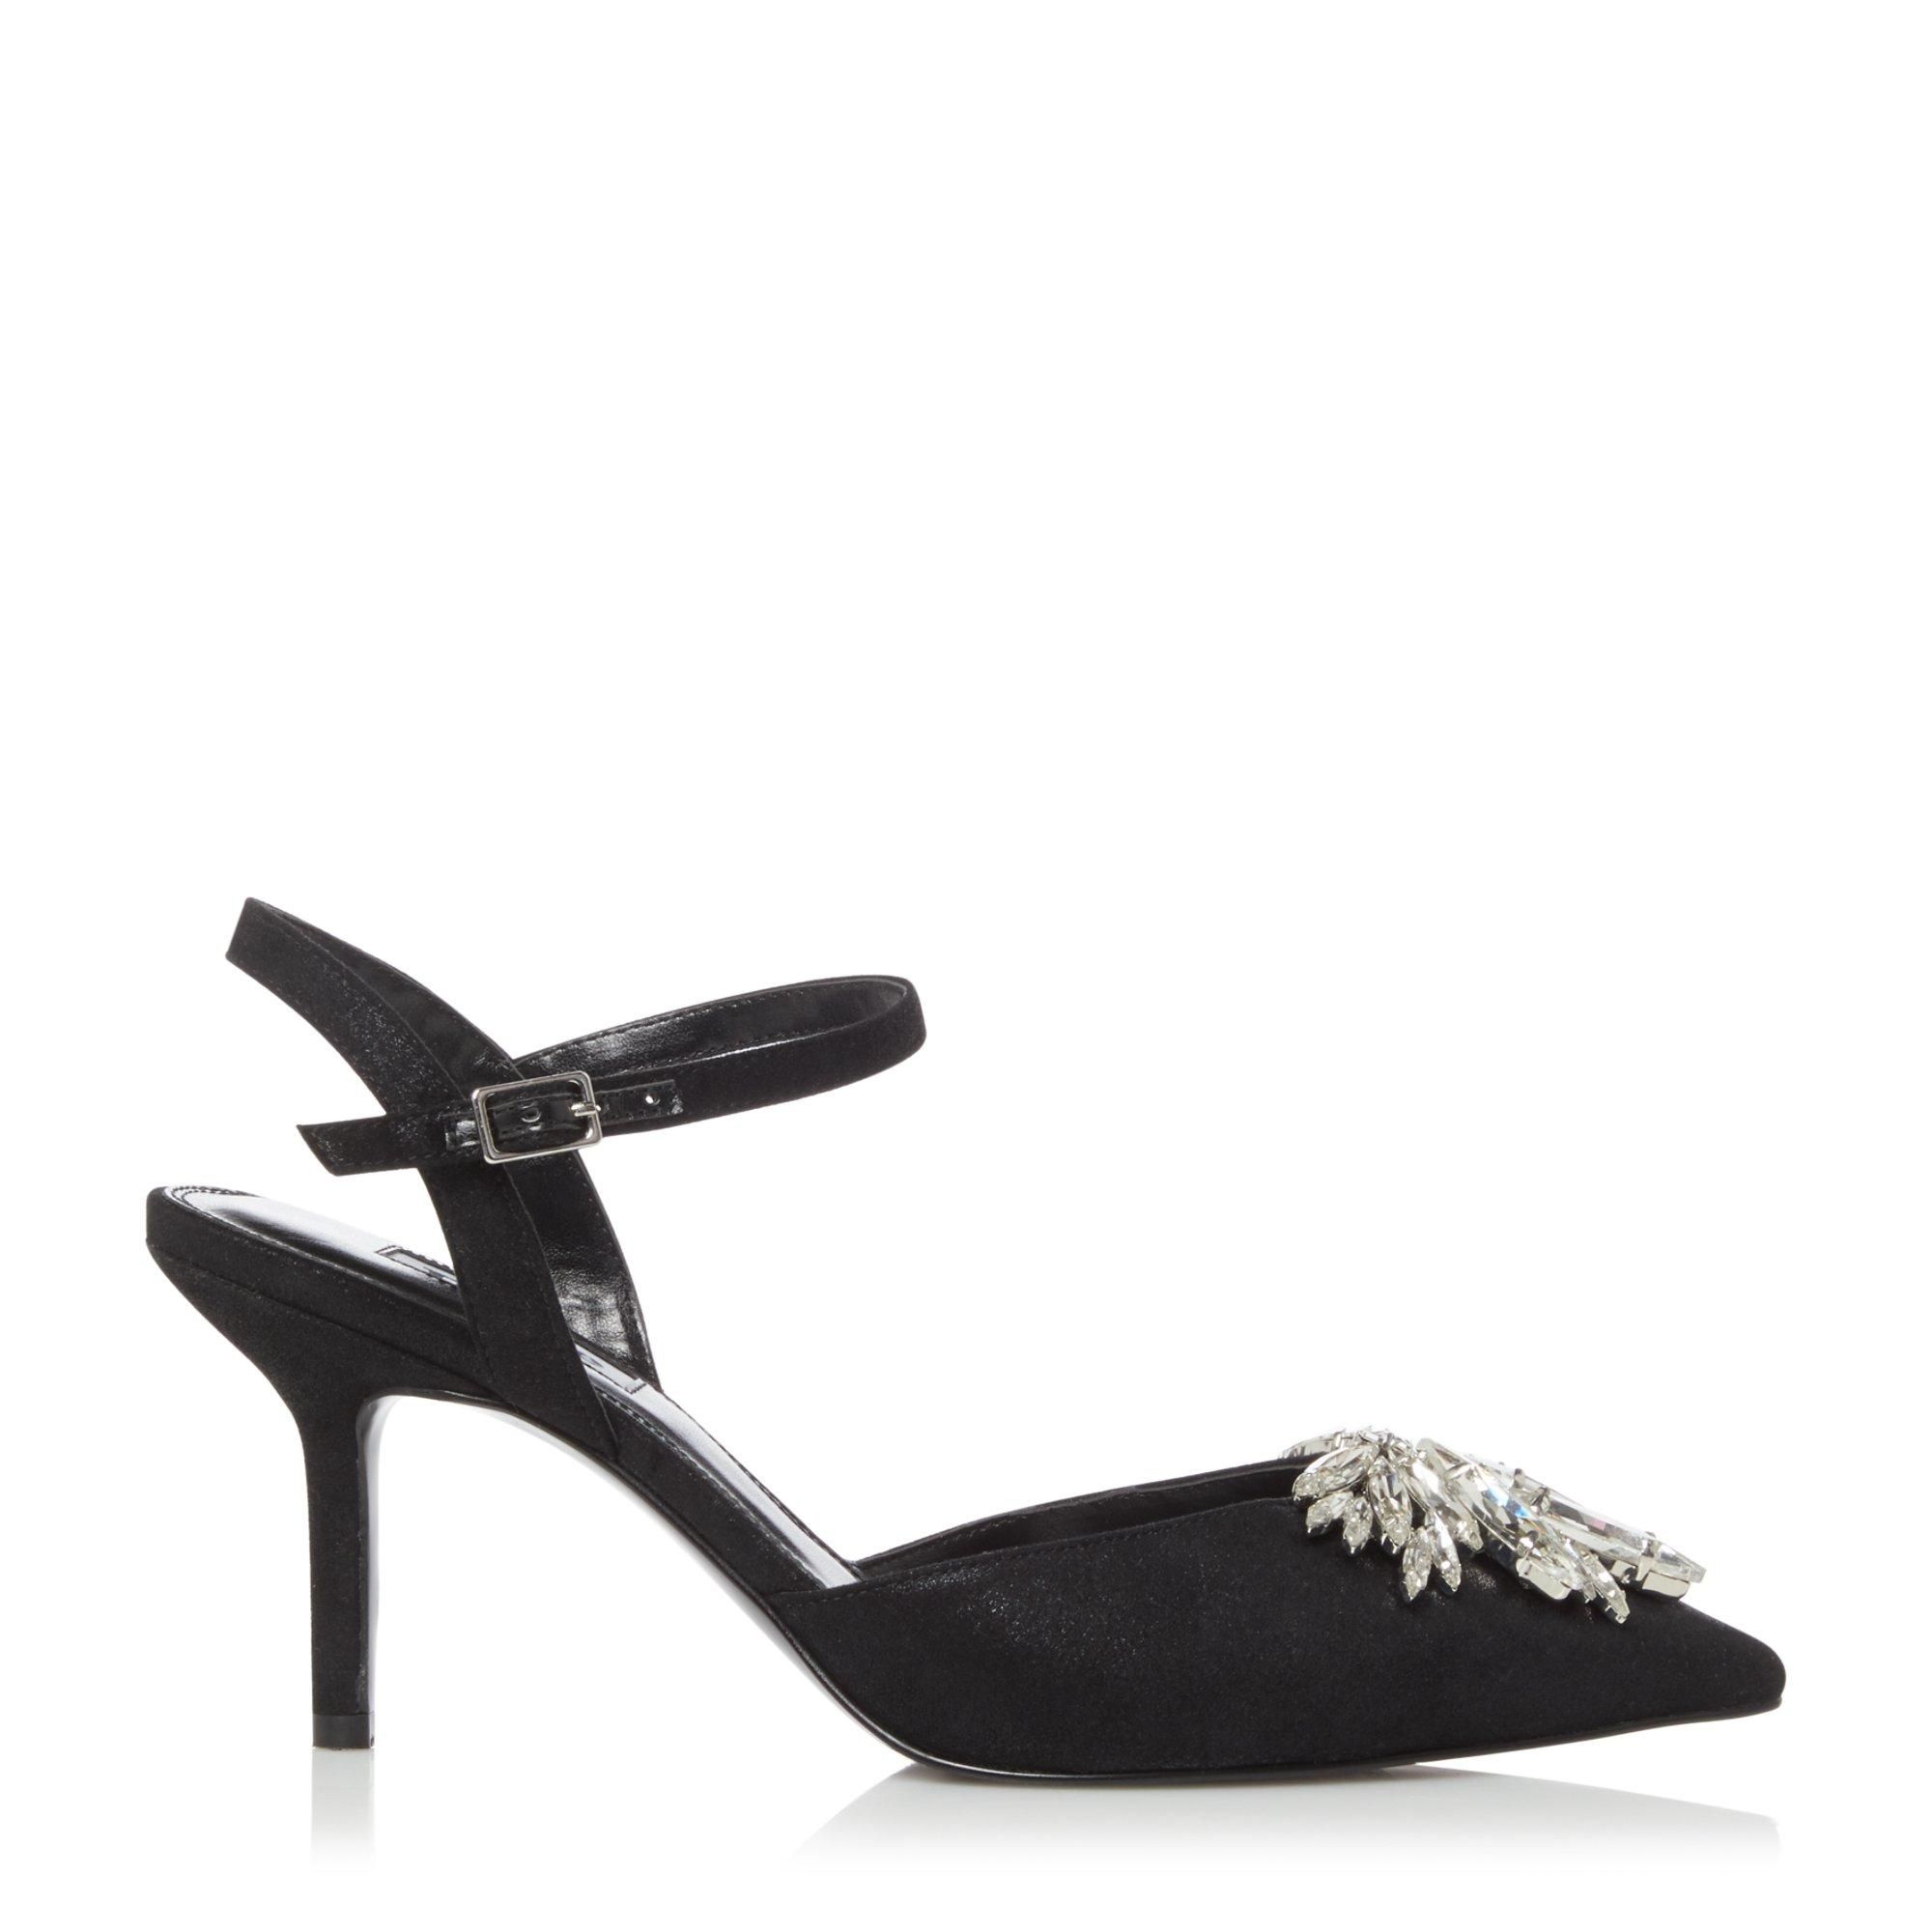 Sophisticaed glamour brought to you with the Cherish heels. These open back court shoes feature a sparkling jewel detail. Thin ankle straps and a thin stiletto adhere to their delicate look.